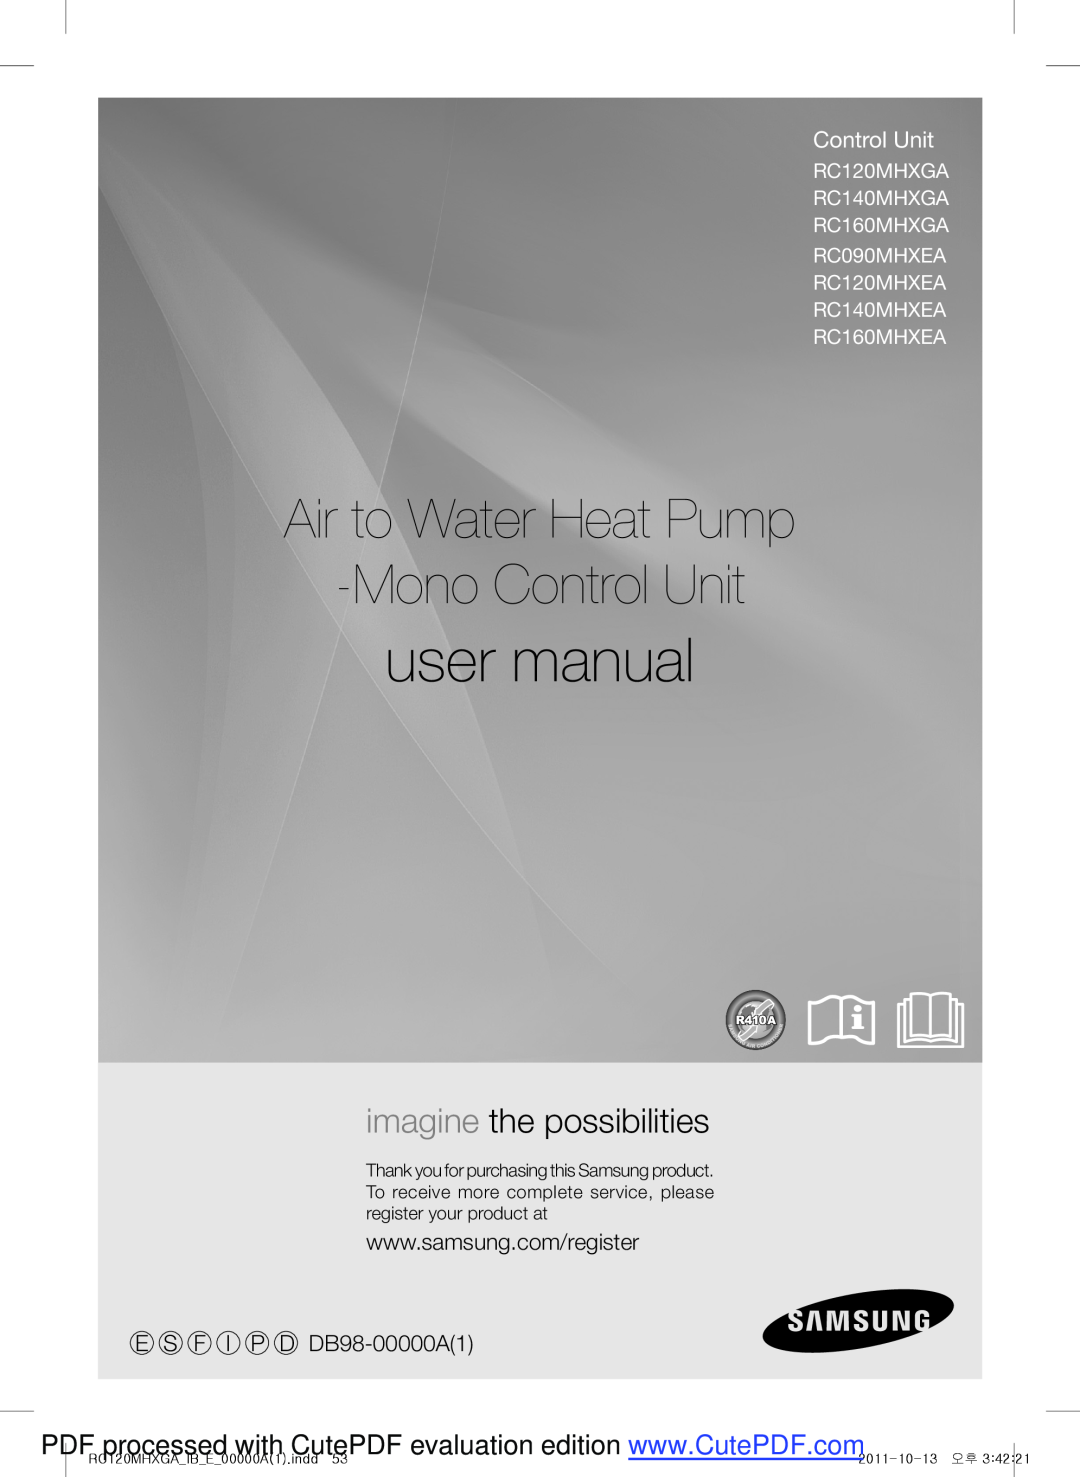 Samsung RC160MHXEA user manual Air to Water Heat Pump MonoControl Unit, imagine the possibilities, 2011-10-13 오후 